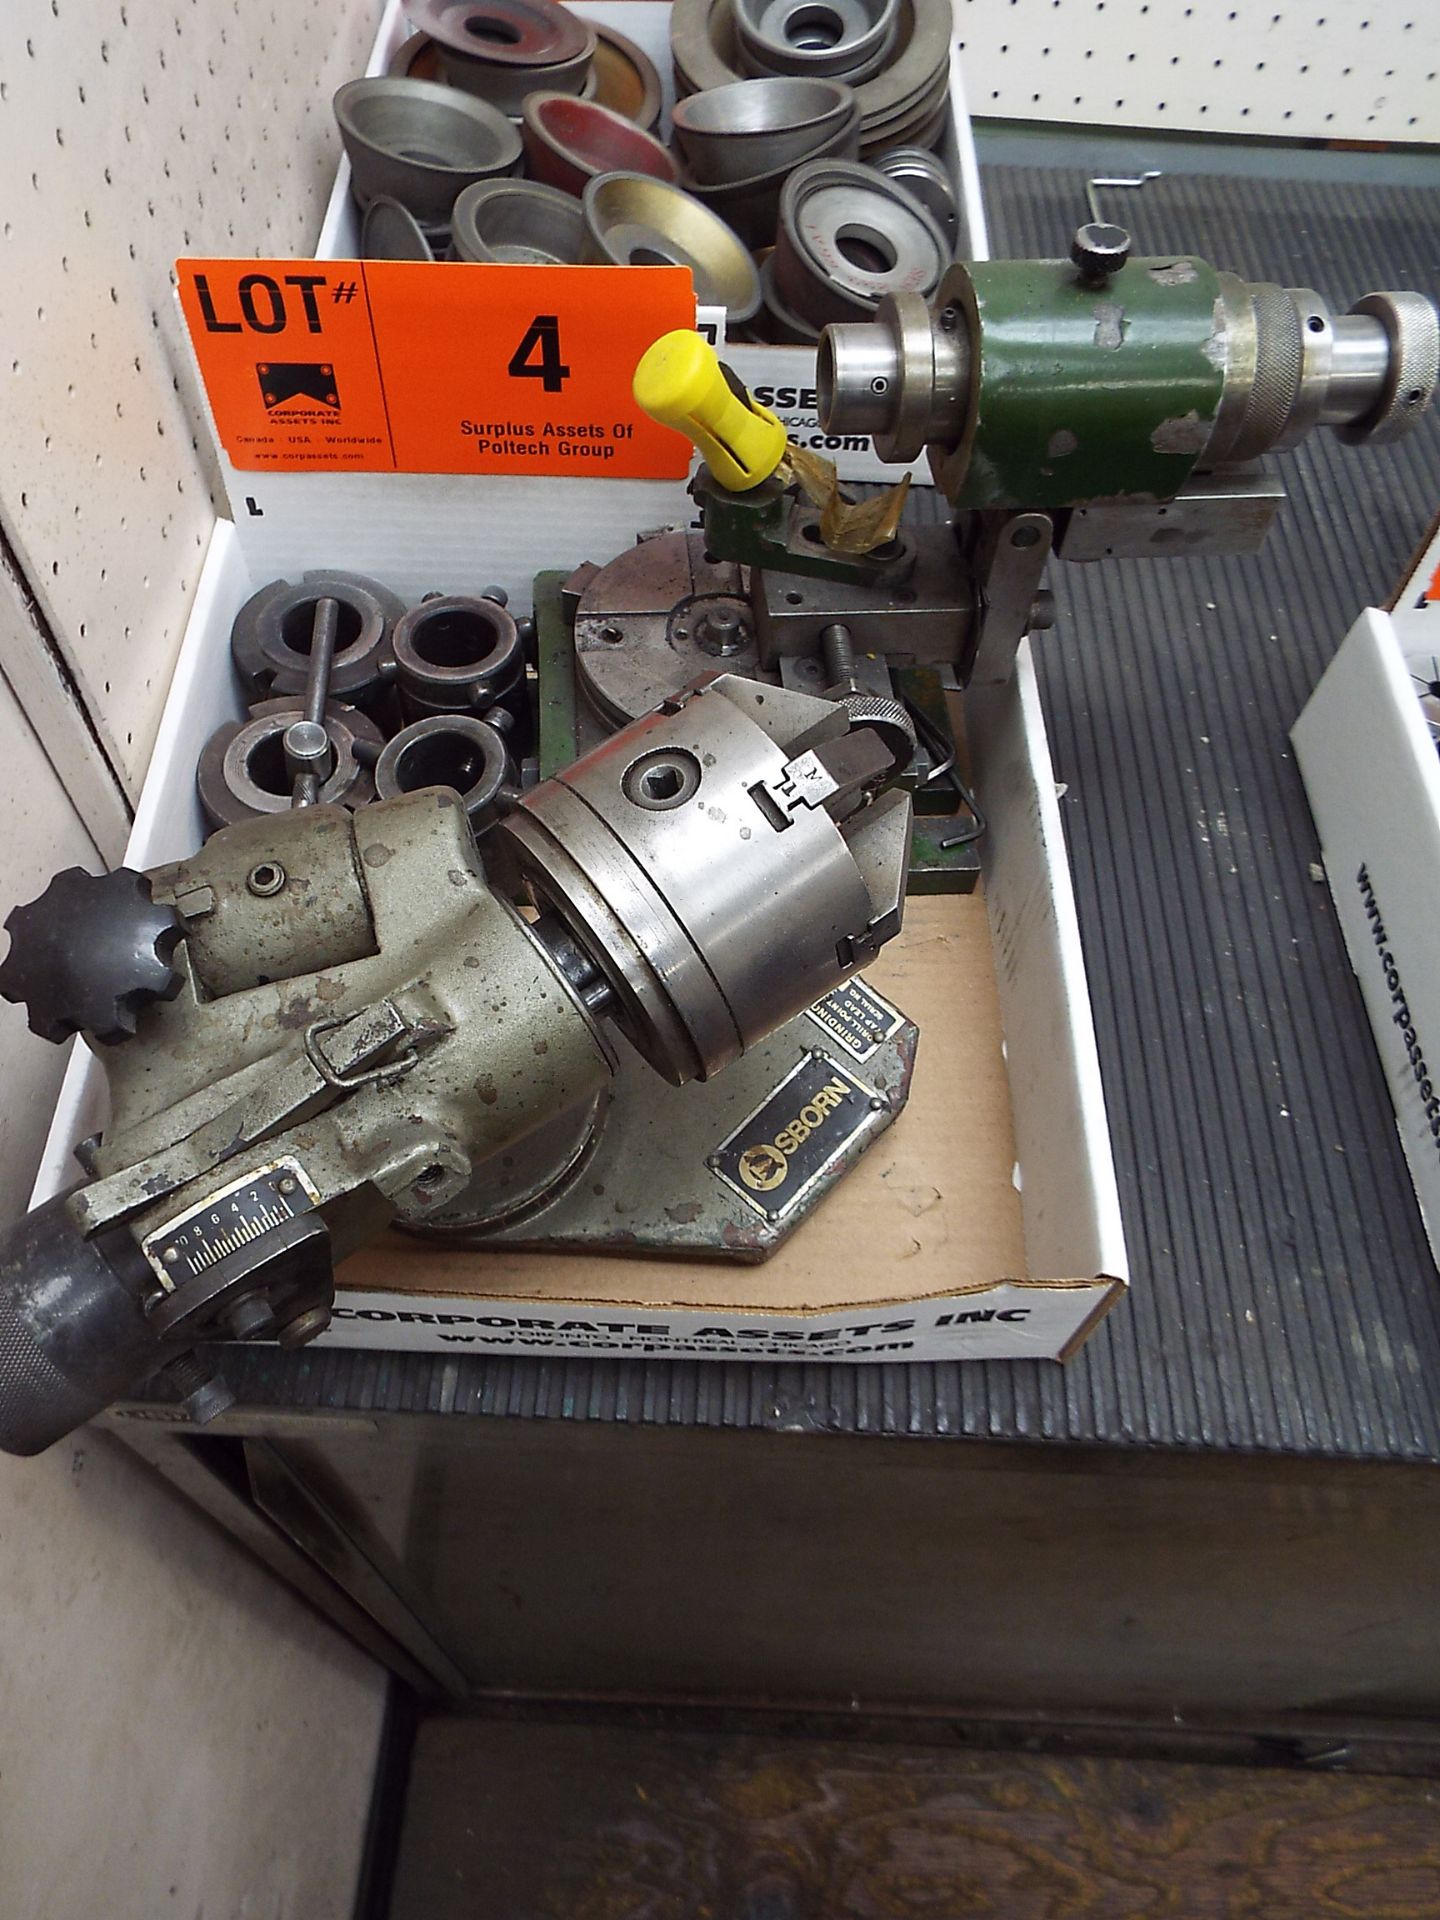 SBORN GRINDING DRILL POINT ATTACHMENT, S/N: N/A (LOCATED AT 460 SIGNET DR, NORTH YORK, ON)